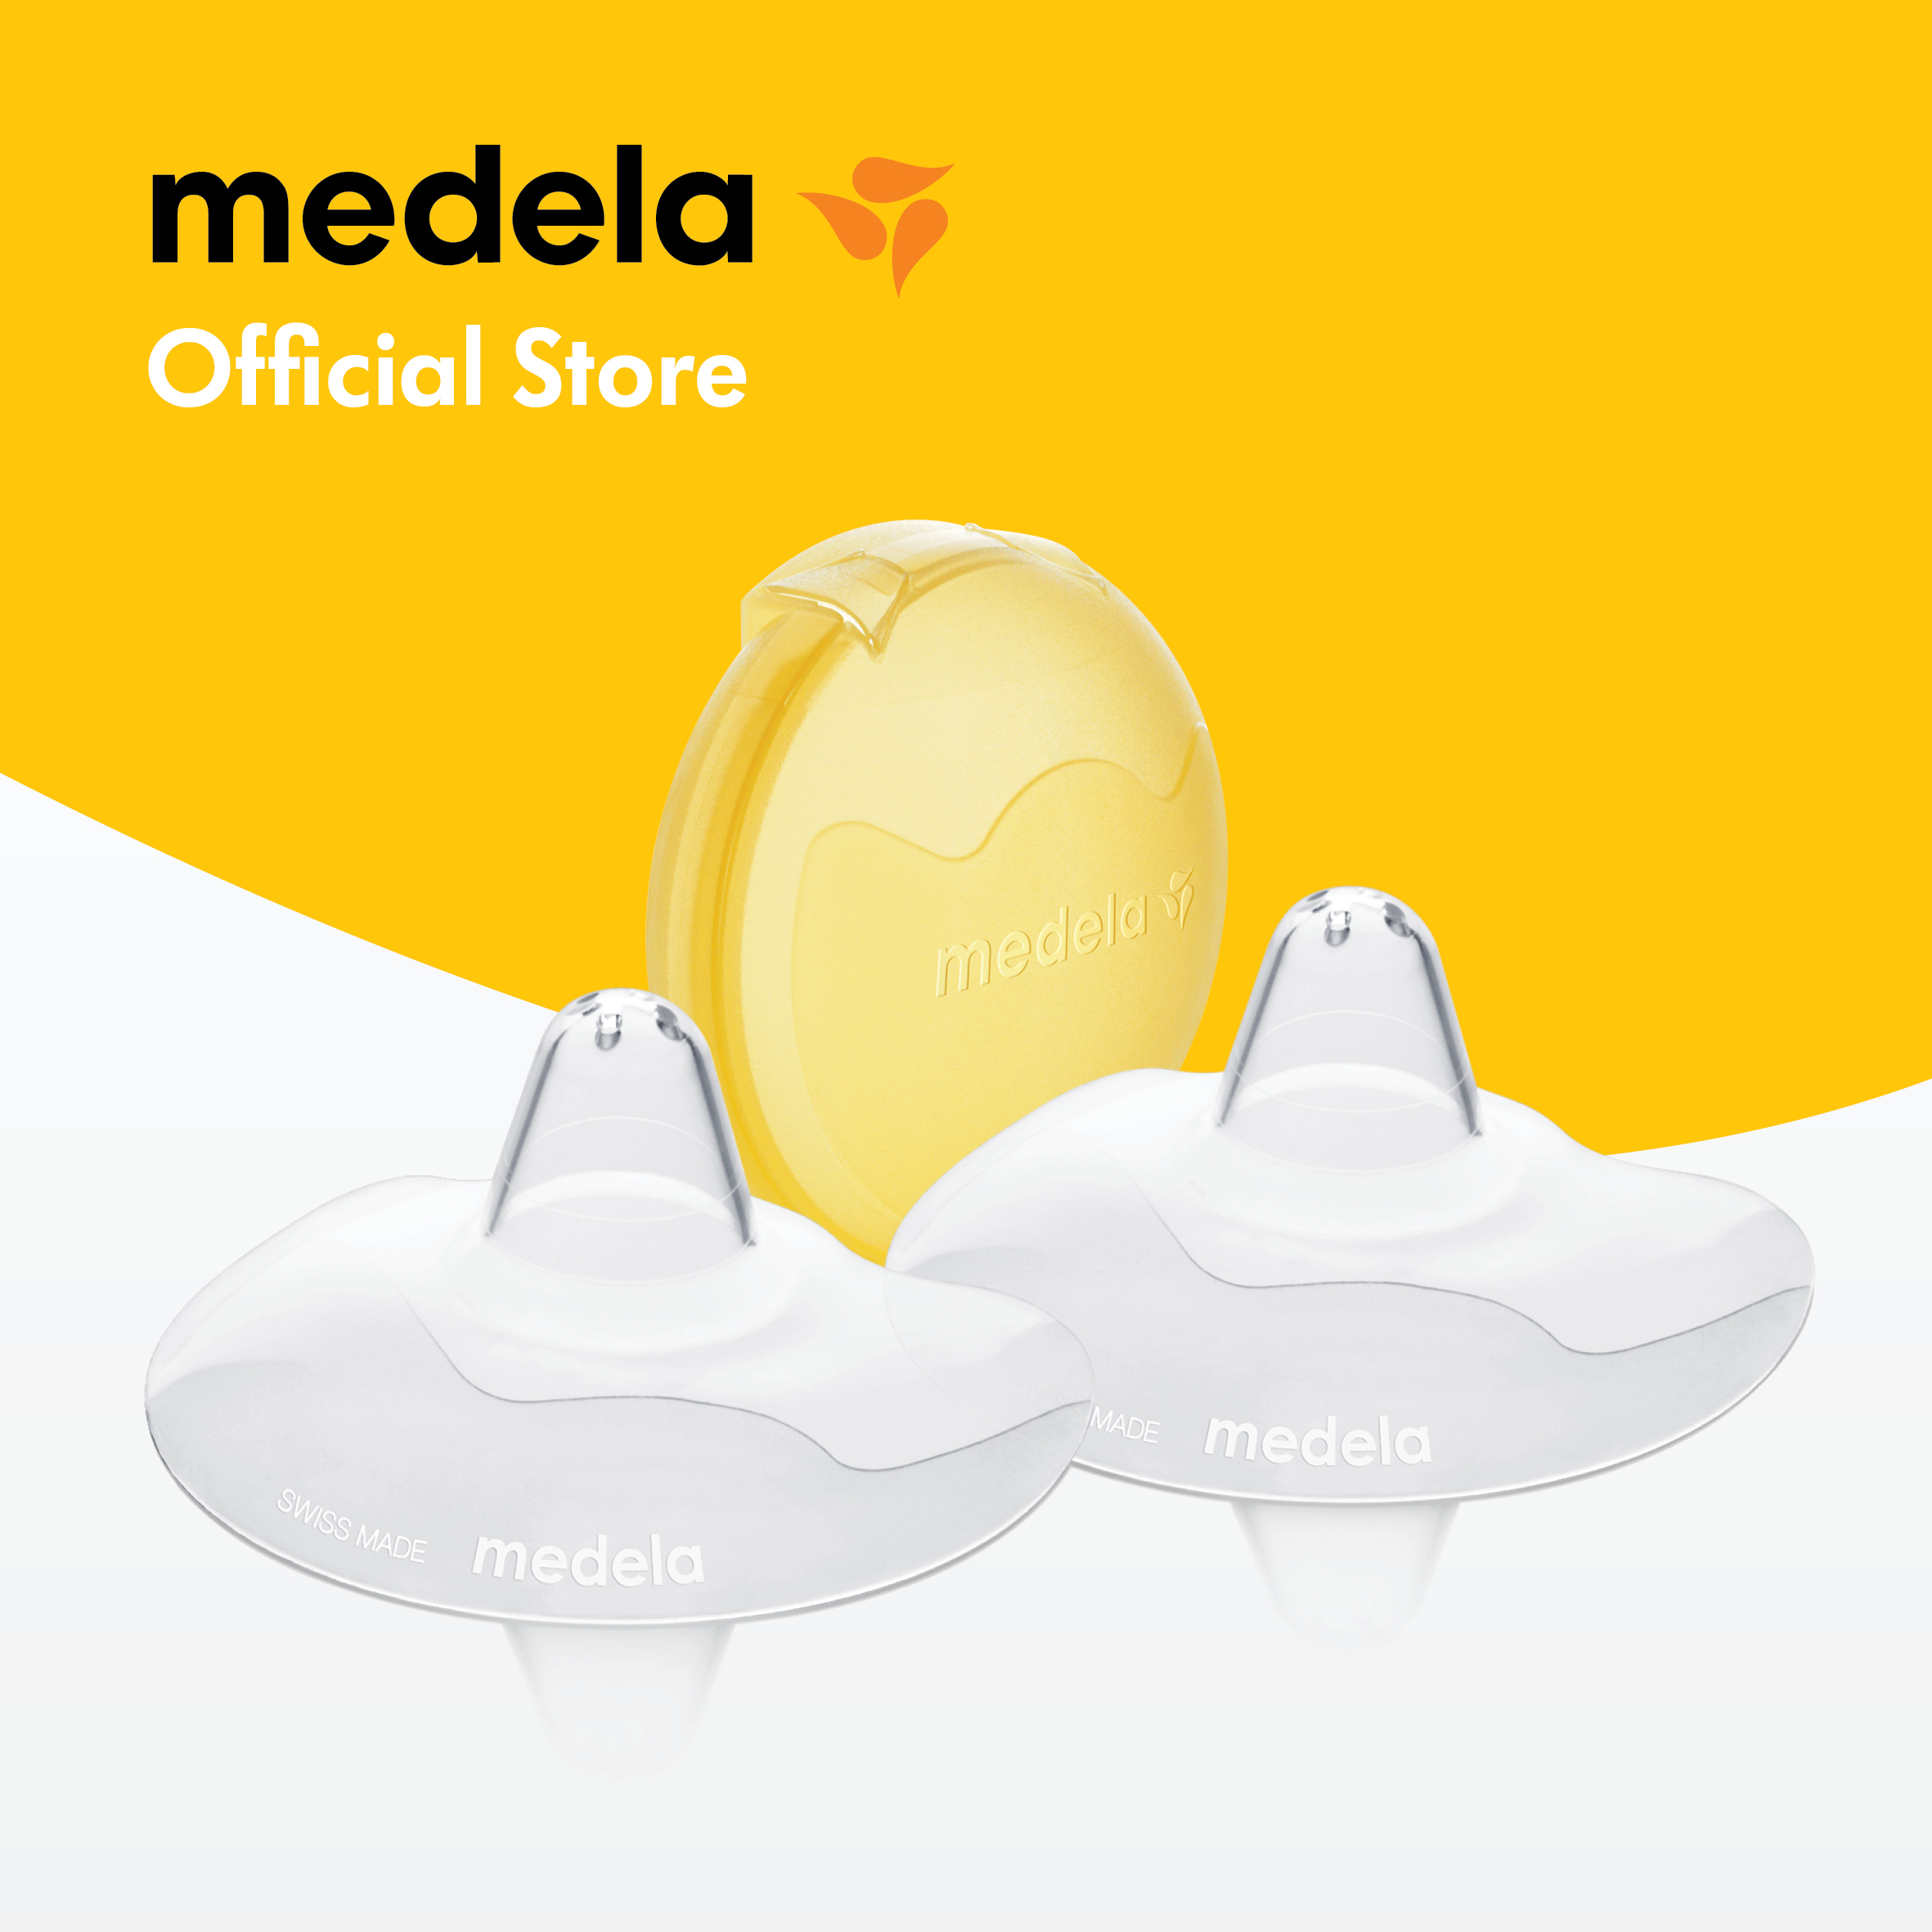 Medela Contact Nipple Shield, 20mm Small, Nippleshield for Breastfeeding  with Latch Difficulties or Flat or Inverted Nipples, Made Without BPA